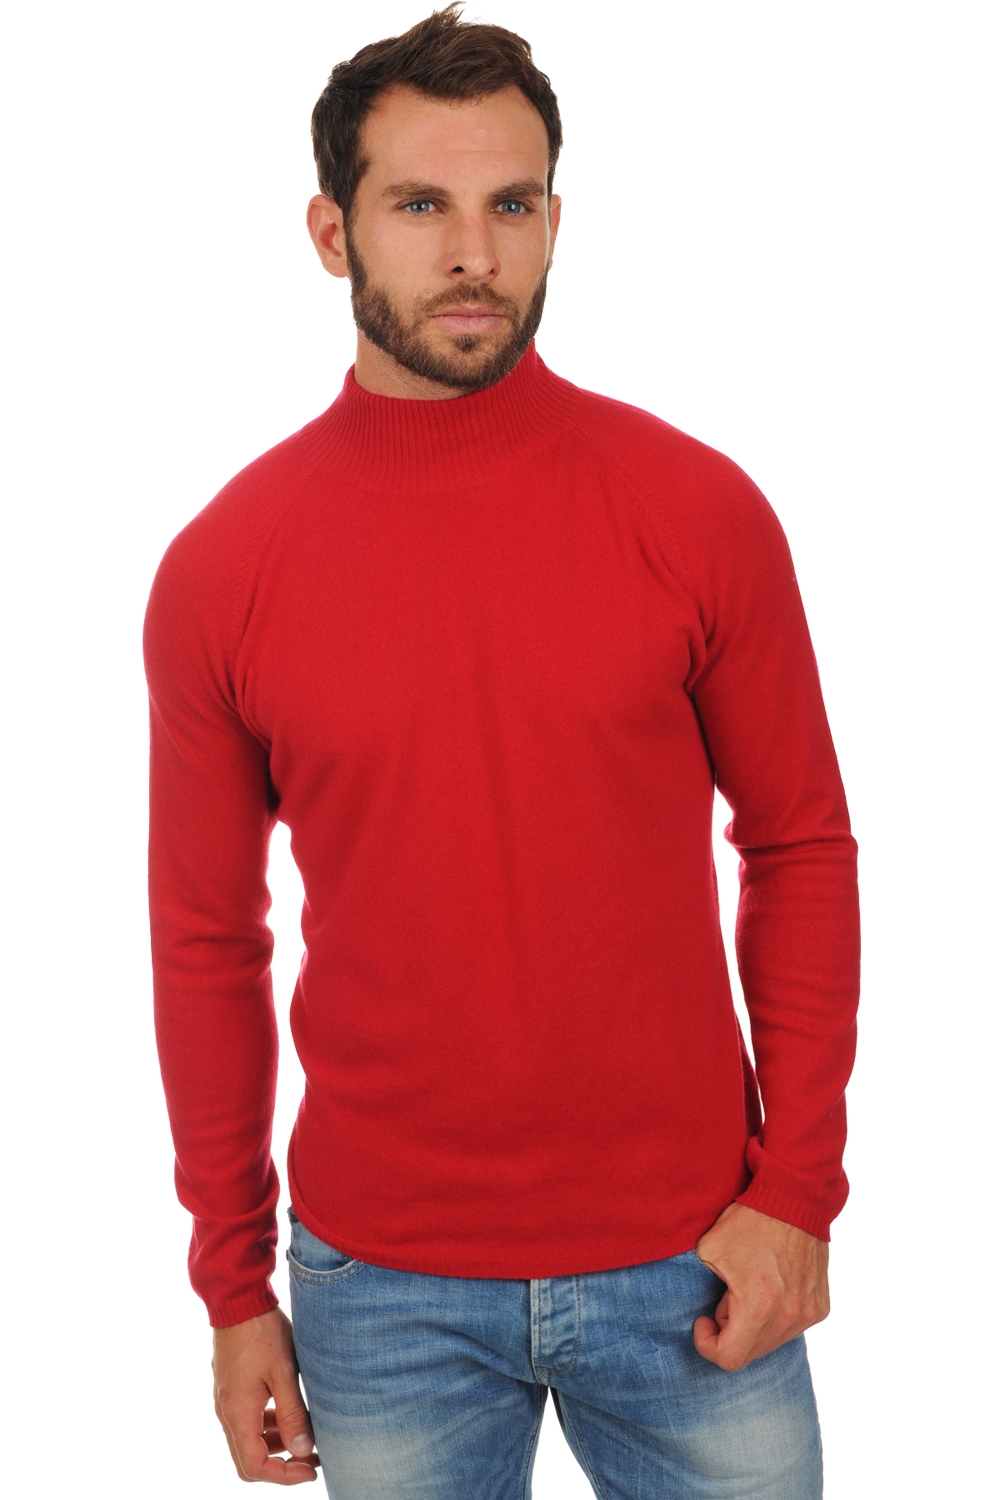 Cashmere men roll neck frederic blood red m